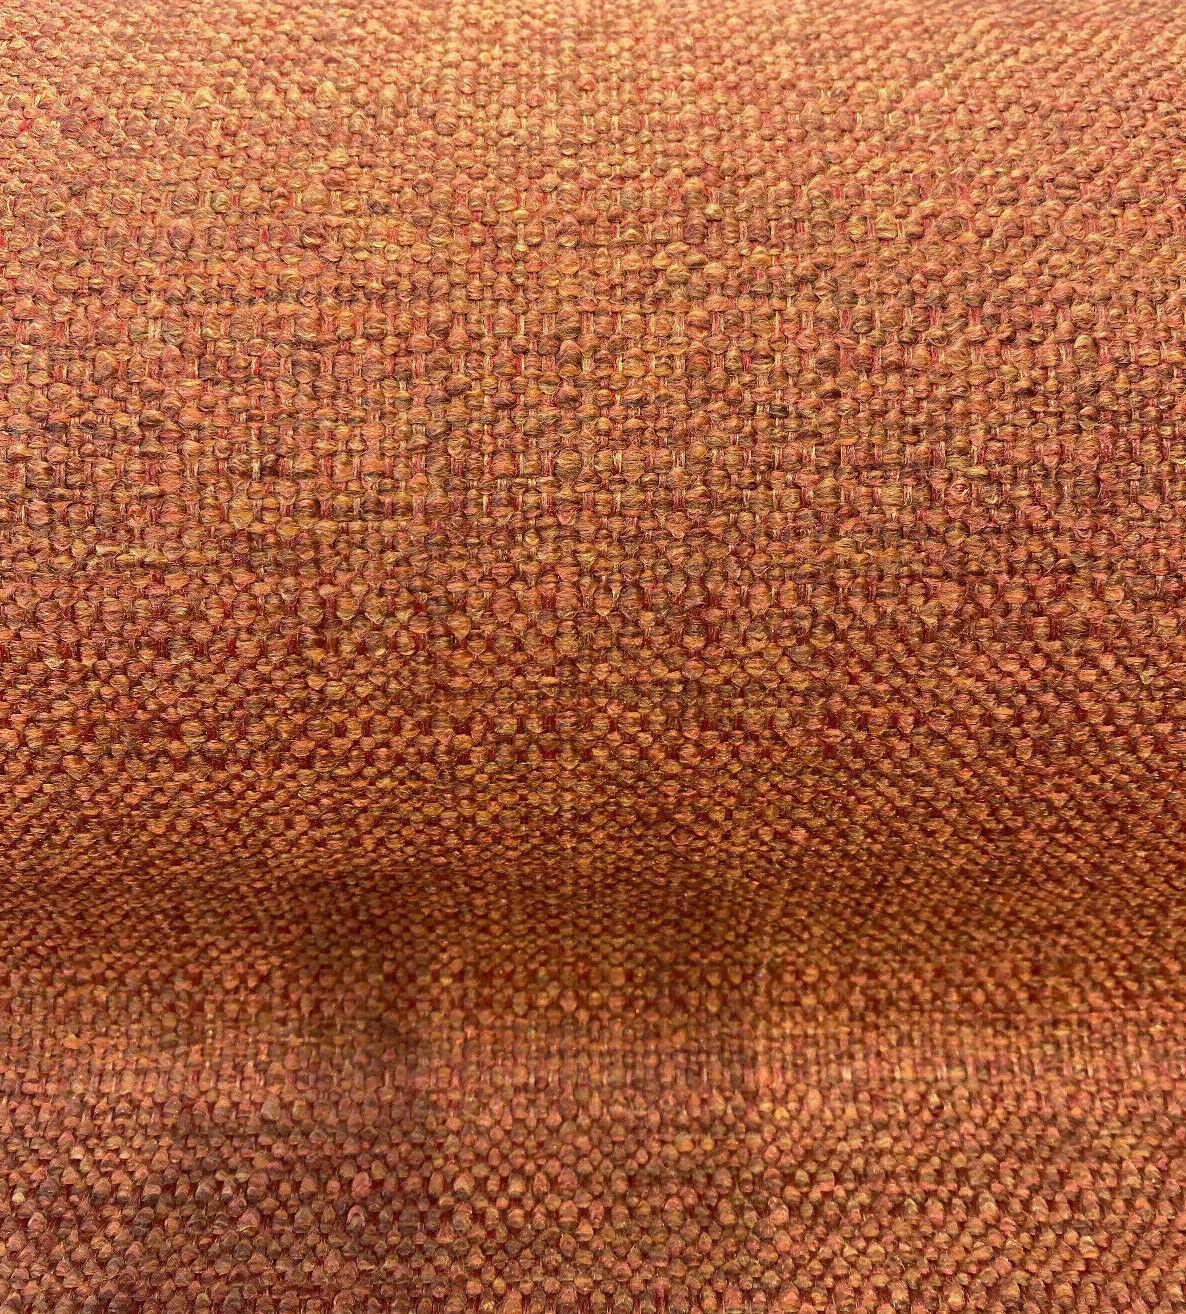 Rust Red Solid Texture Velvet Upholstery Fabric by The Yard